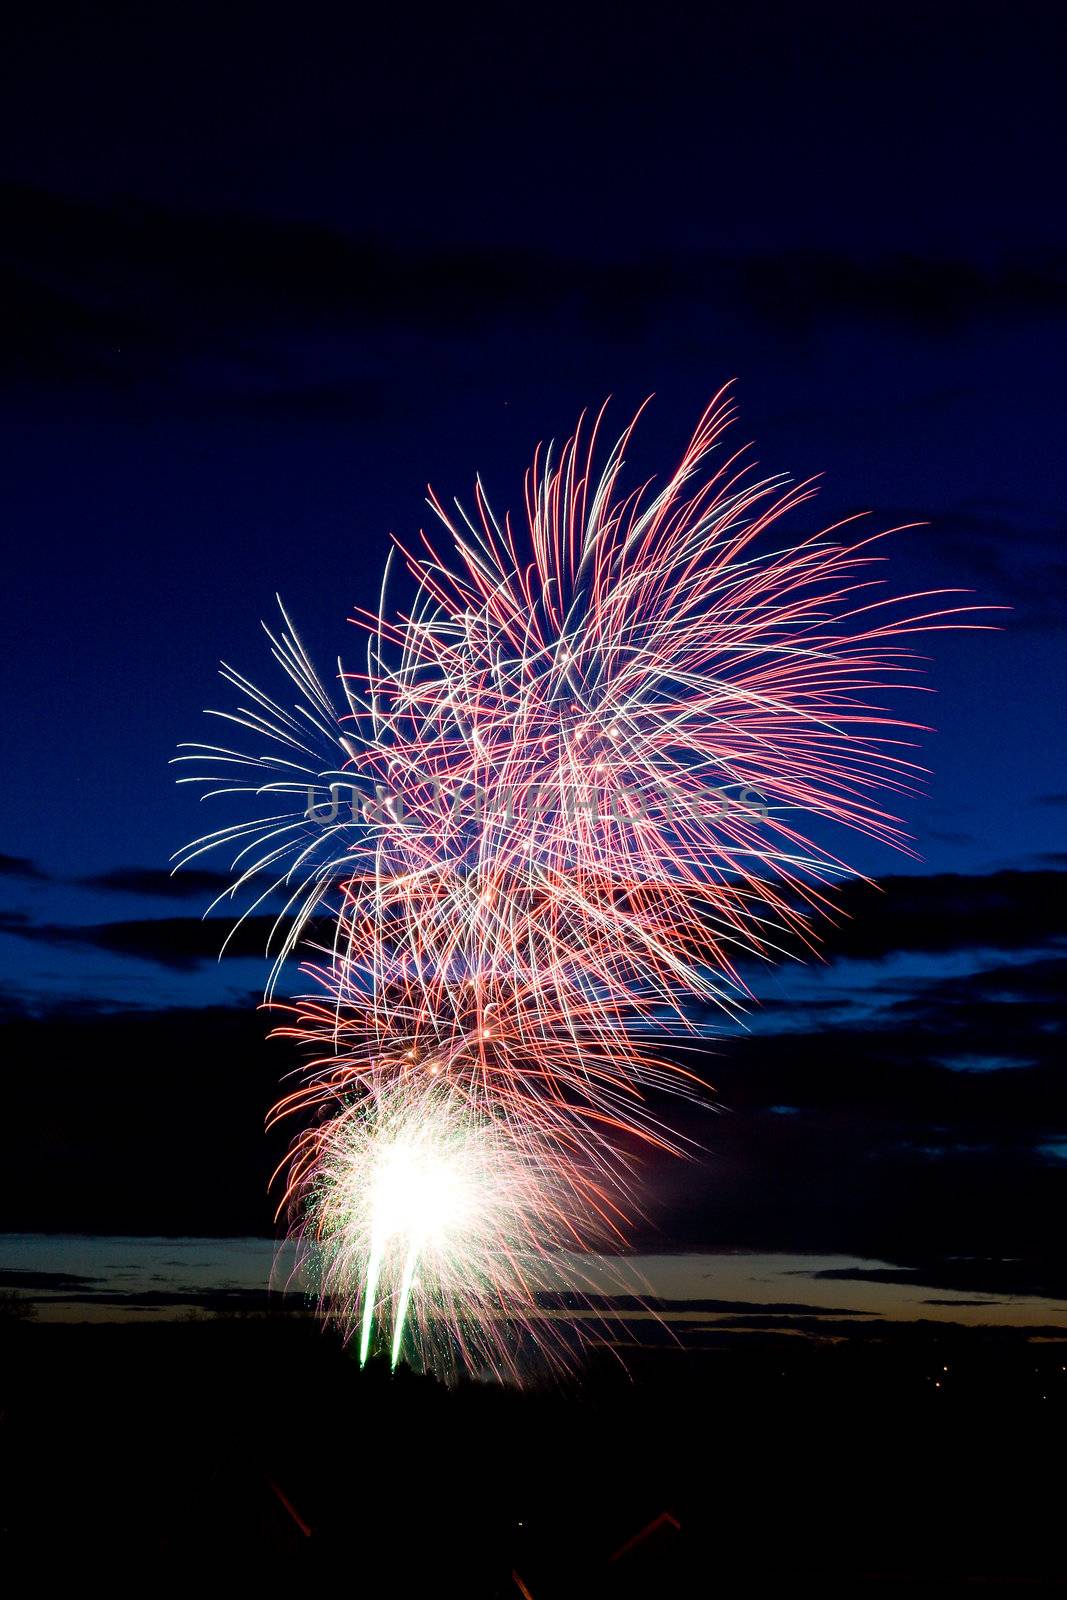 Fireworks by KeithWilson